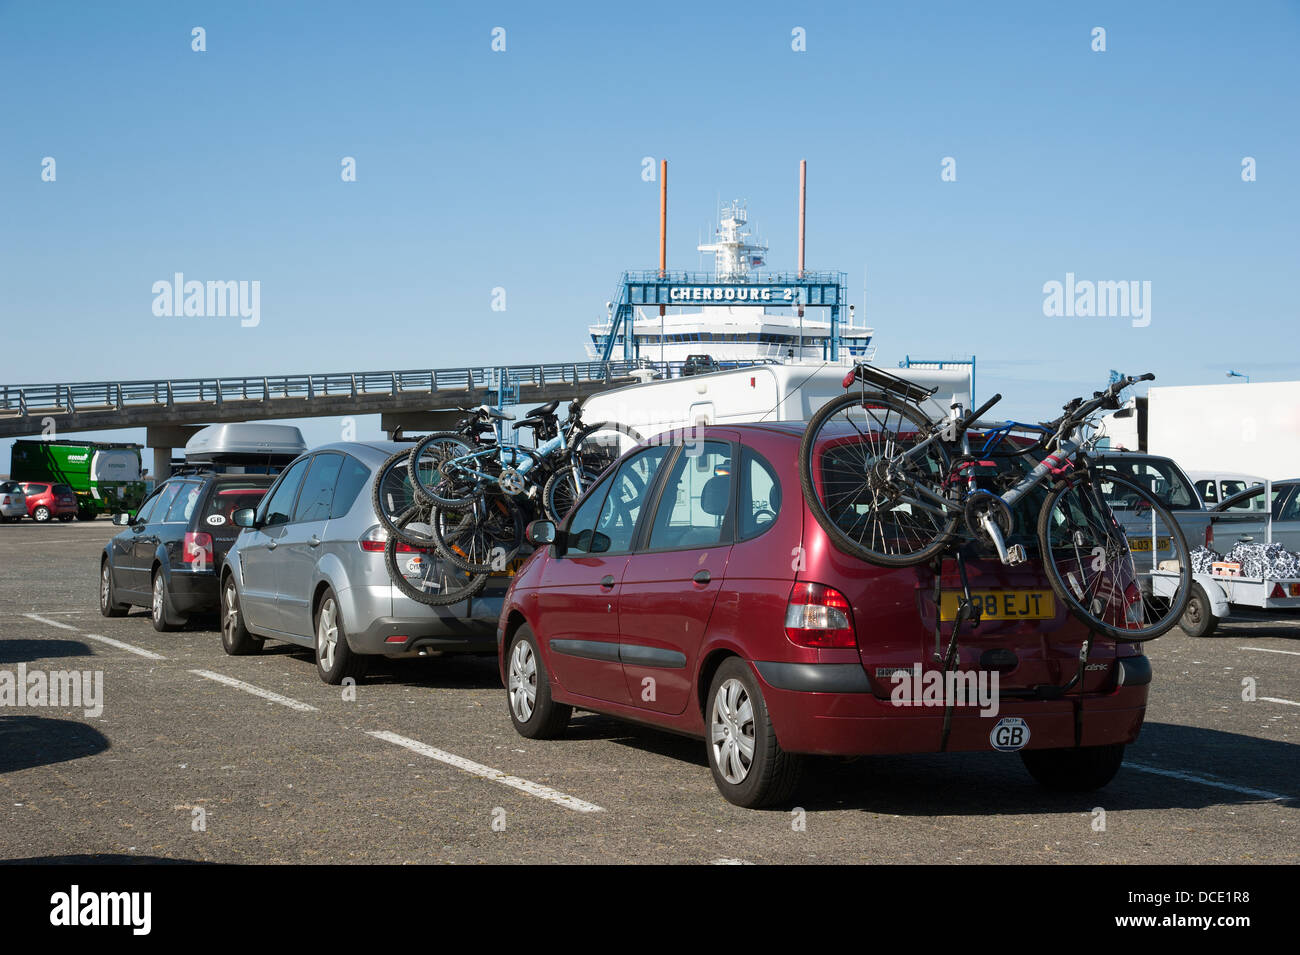 Bicycles on car cycle racks wait to load onto cross channel ferry at Cherbourg Normandy France Stock Photo